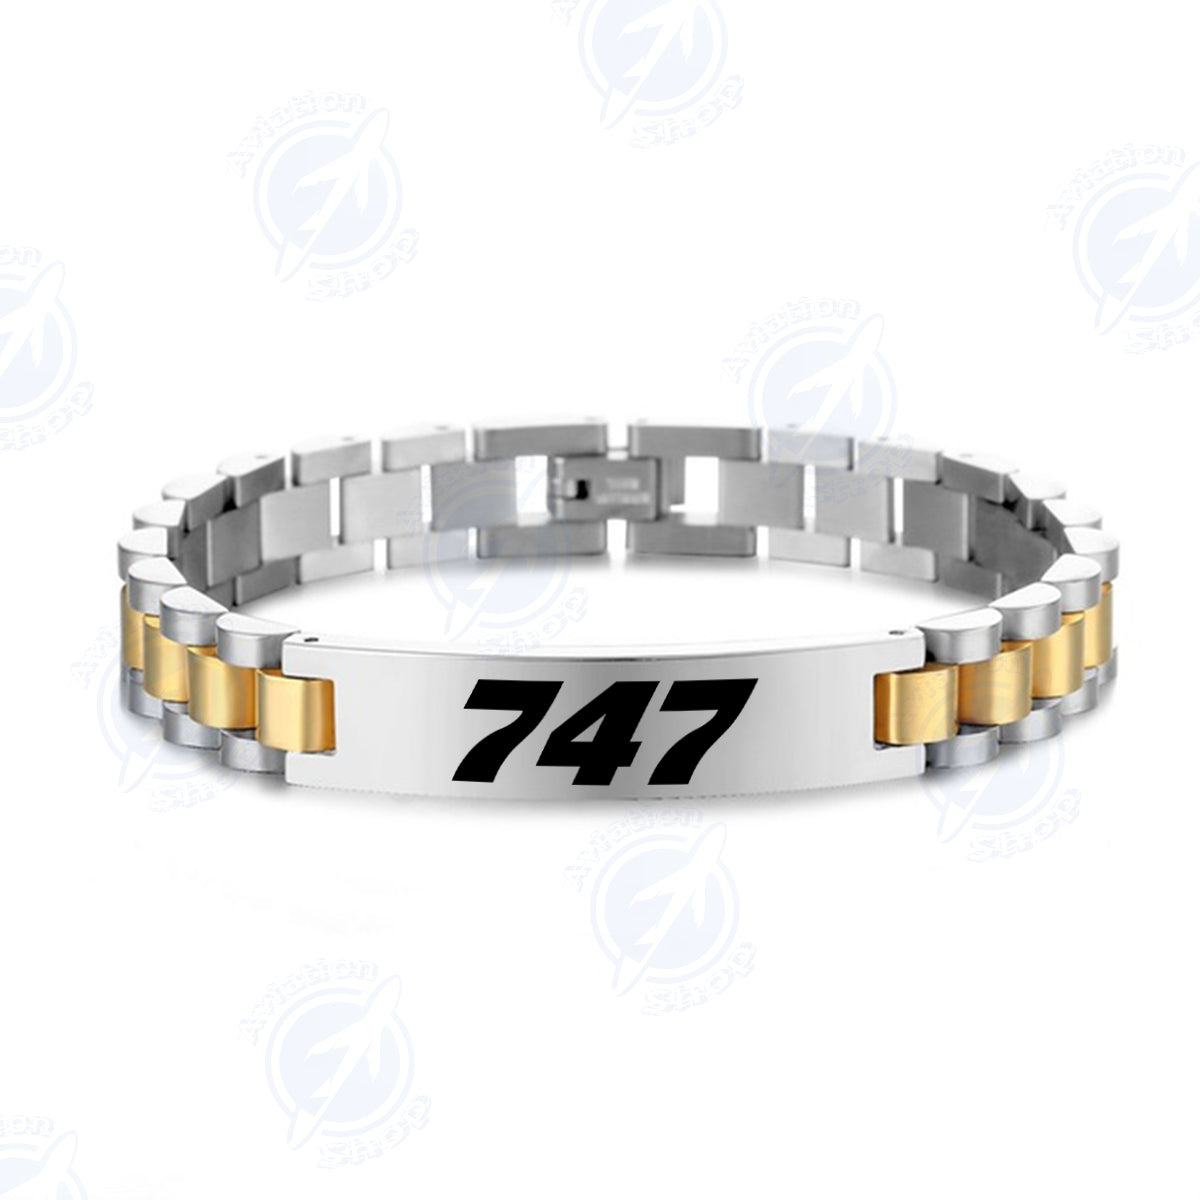 747 Flat Text Designed Stainless Steel Chain Bracelets